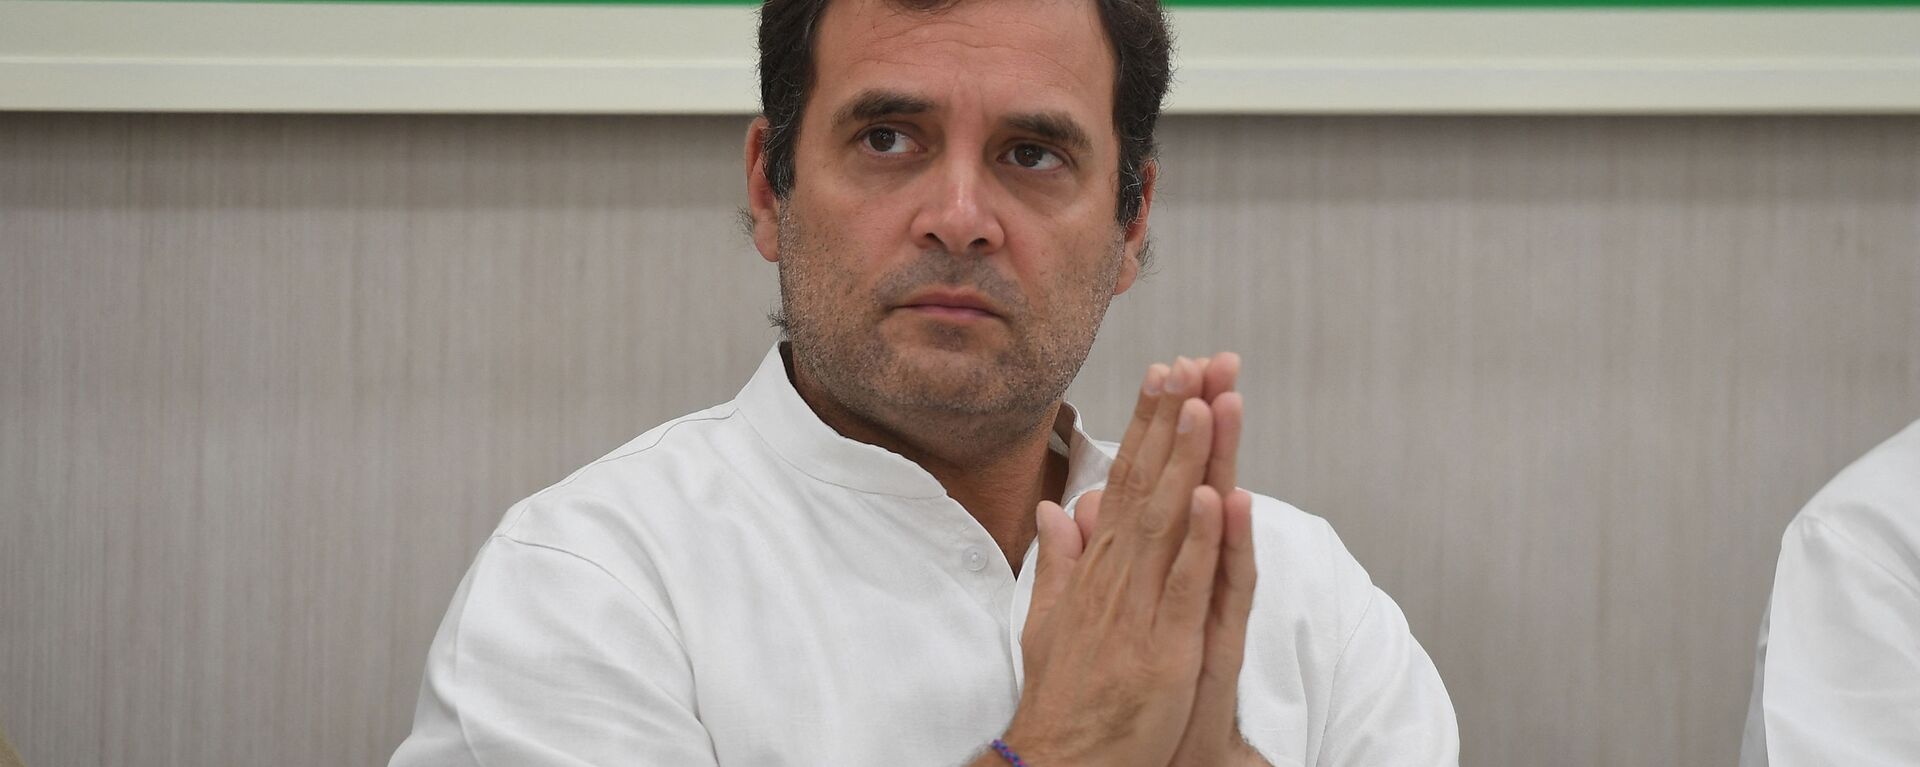 Indian National Congress Party president Rahul Gandhi gestures during a Congress Working Committee (CWC) meeting in New Delhi on May 25, 2019. - Sputnik International, 1920, 14.08.2021